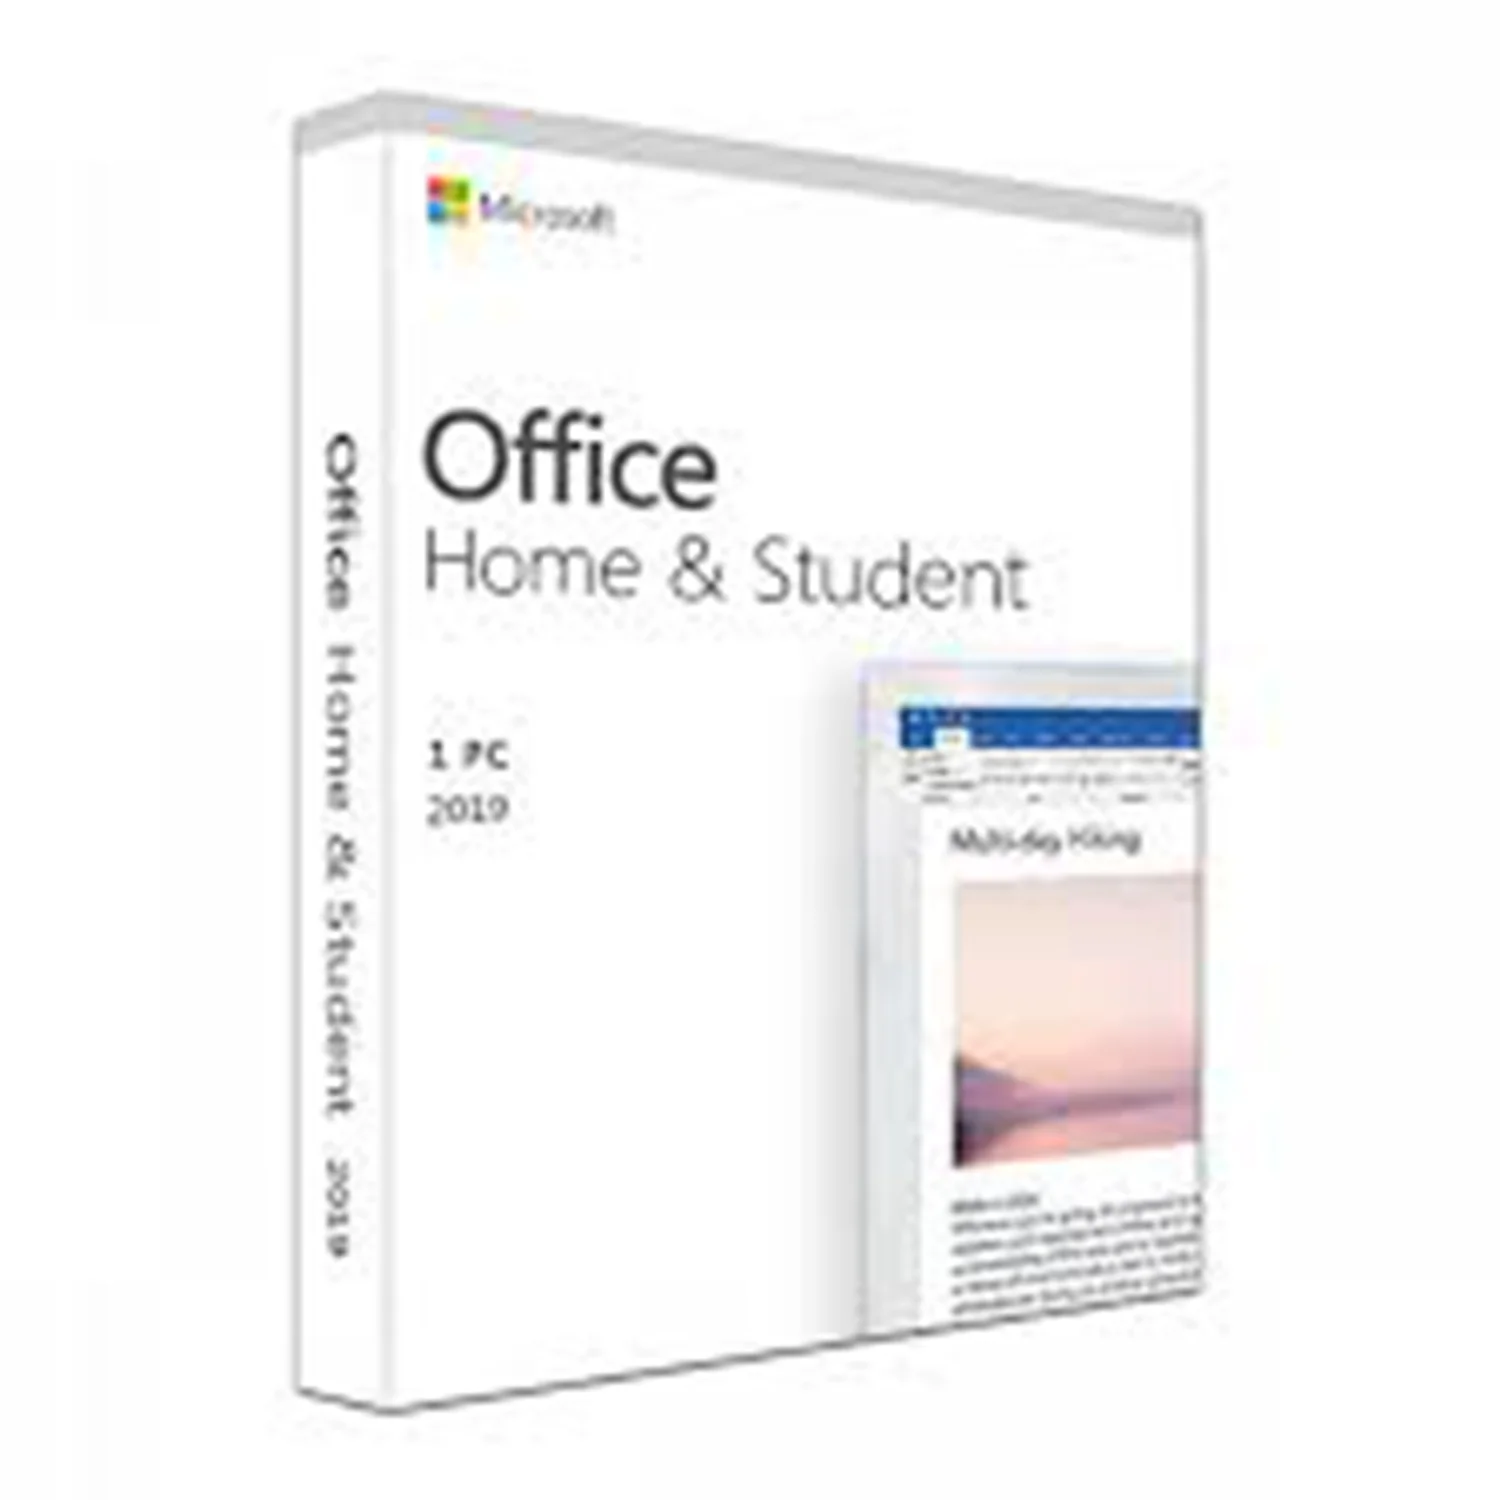 Office 2019 student